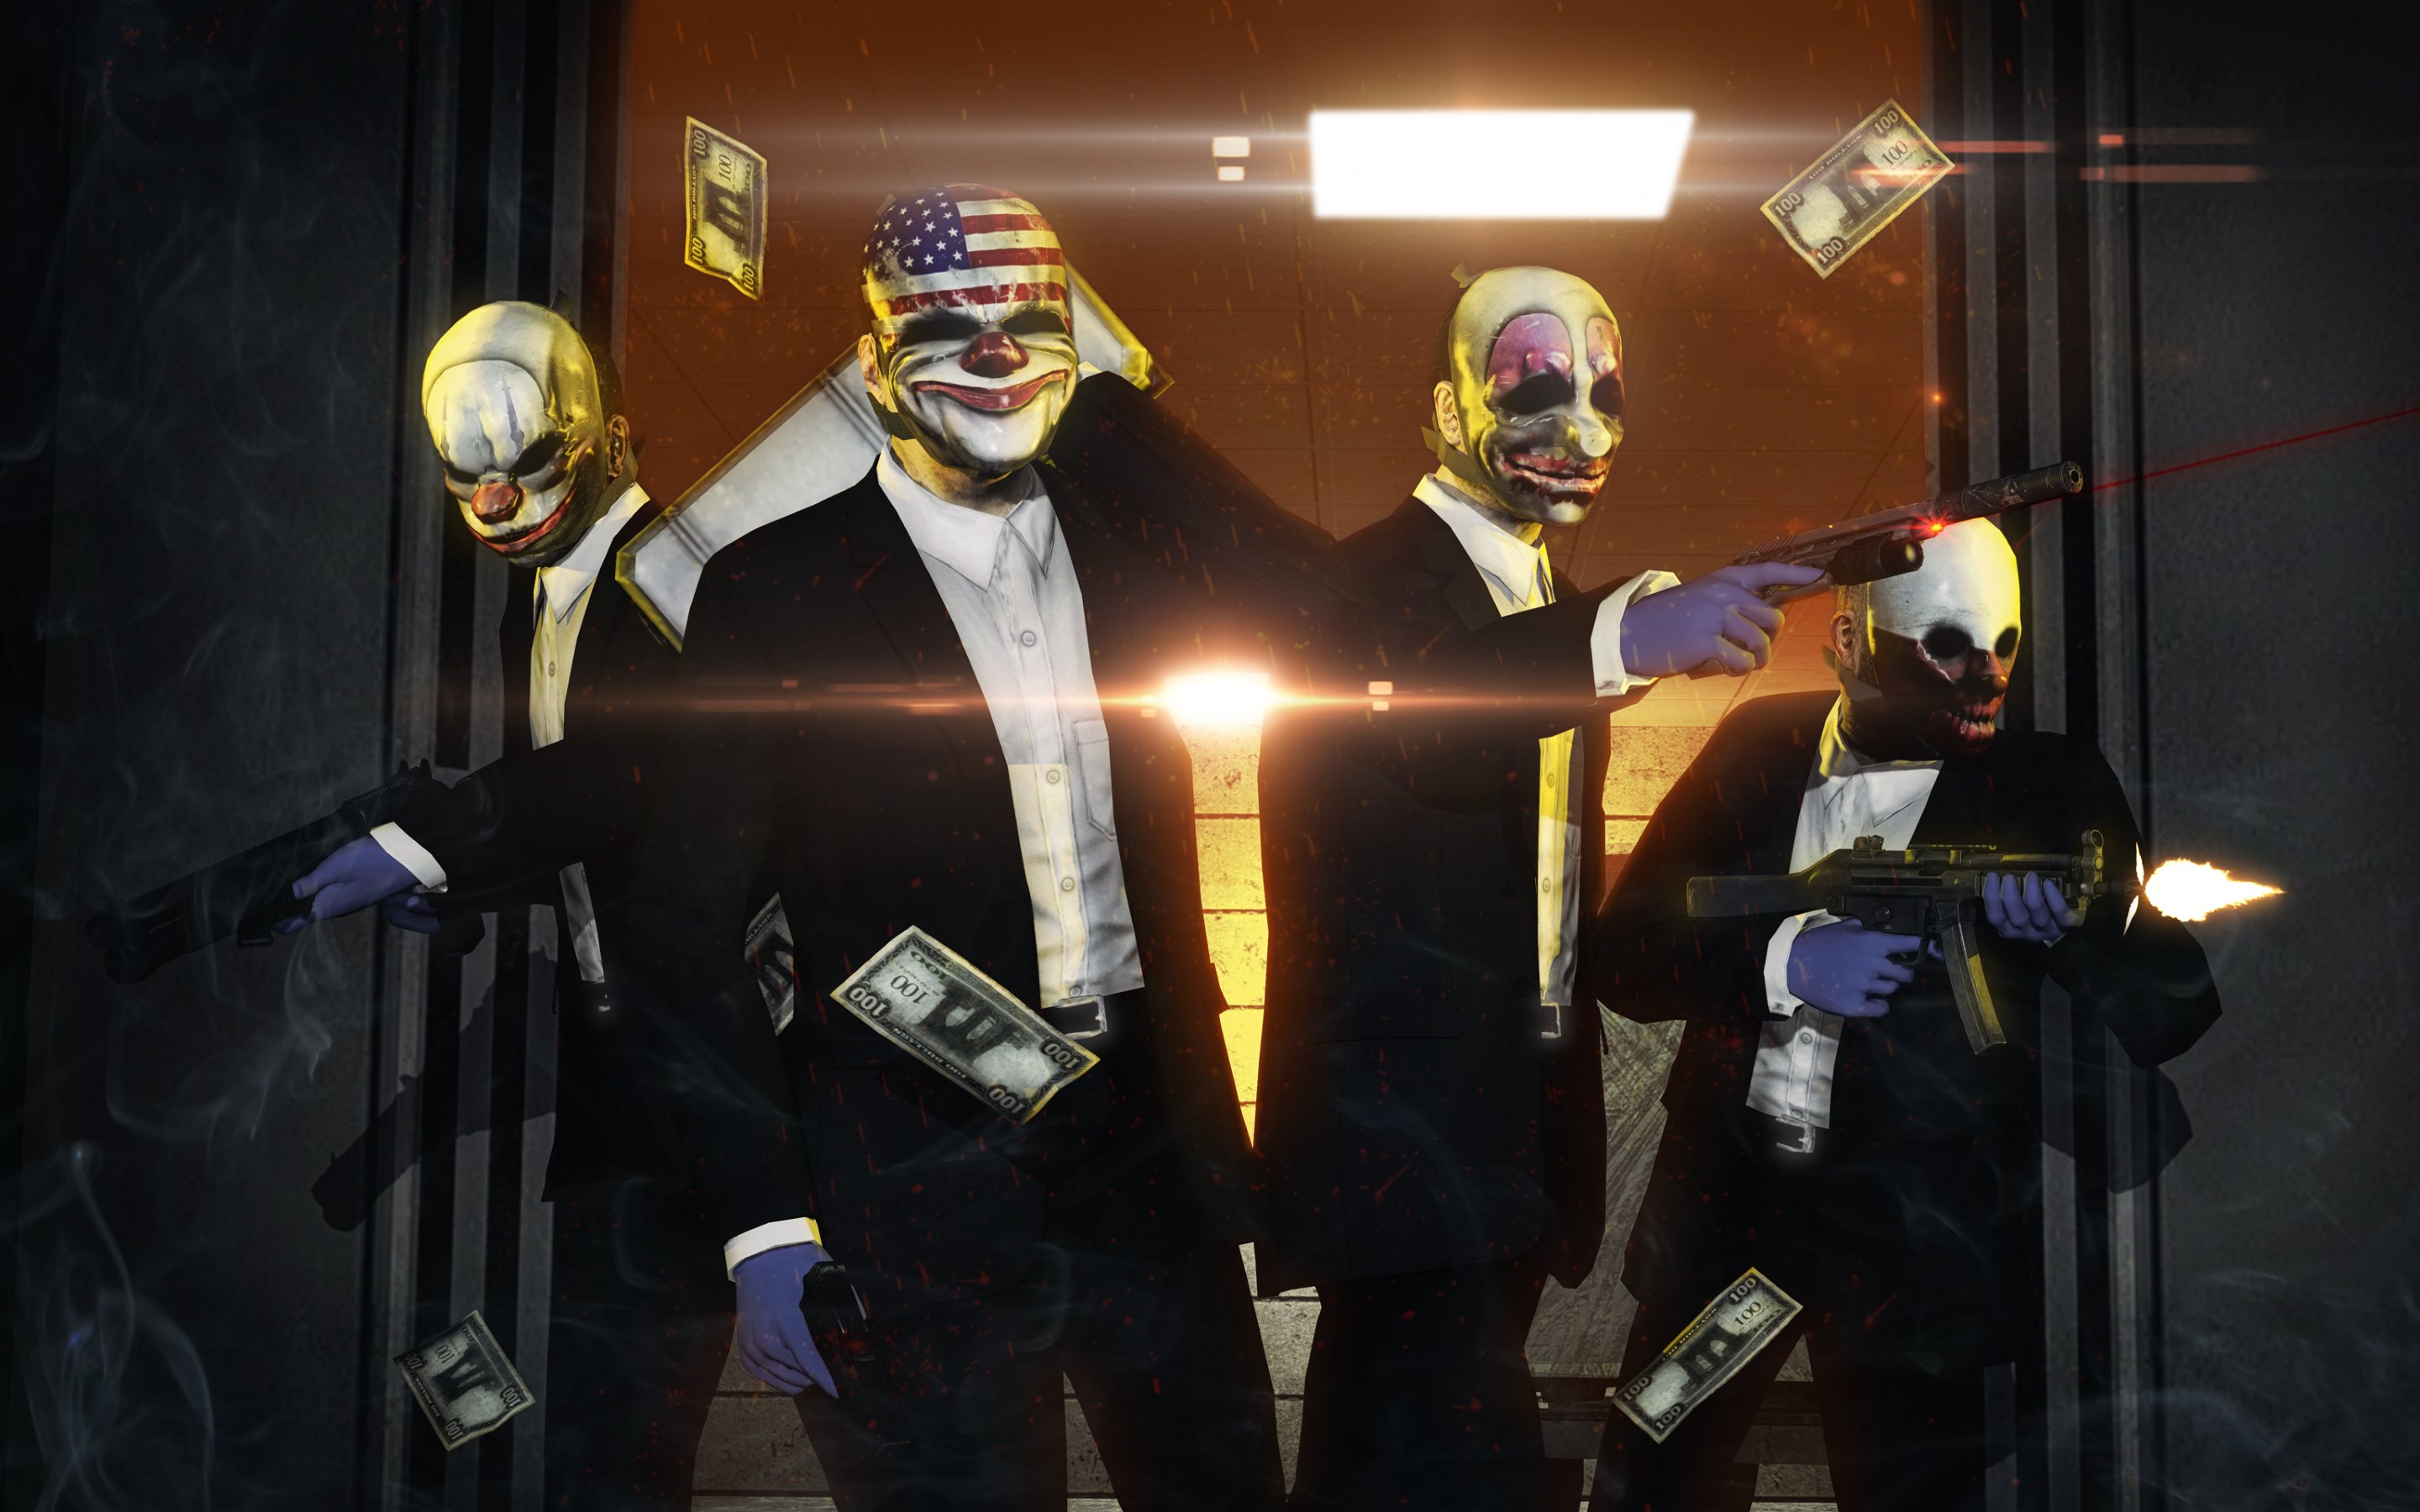 payday 2 wallpaper hd,theatrical property,fictional character,supervillain,costume,event